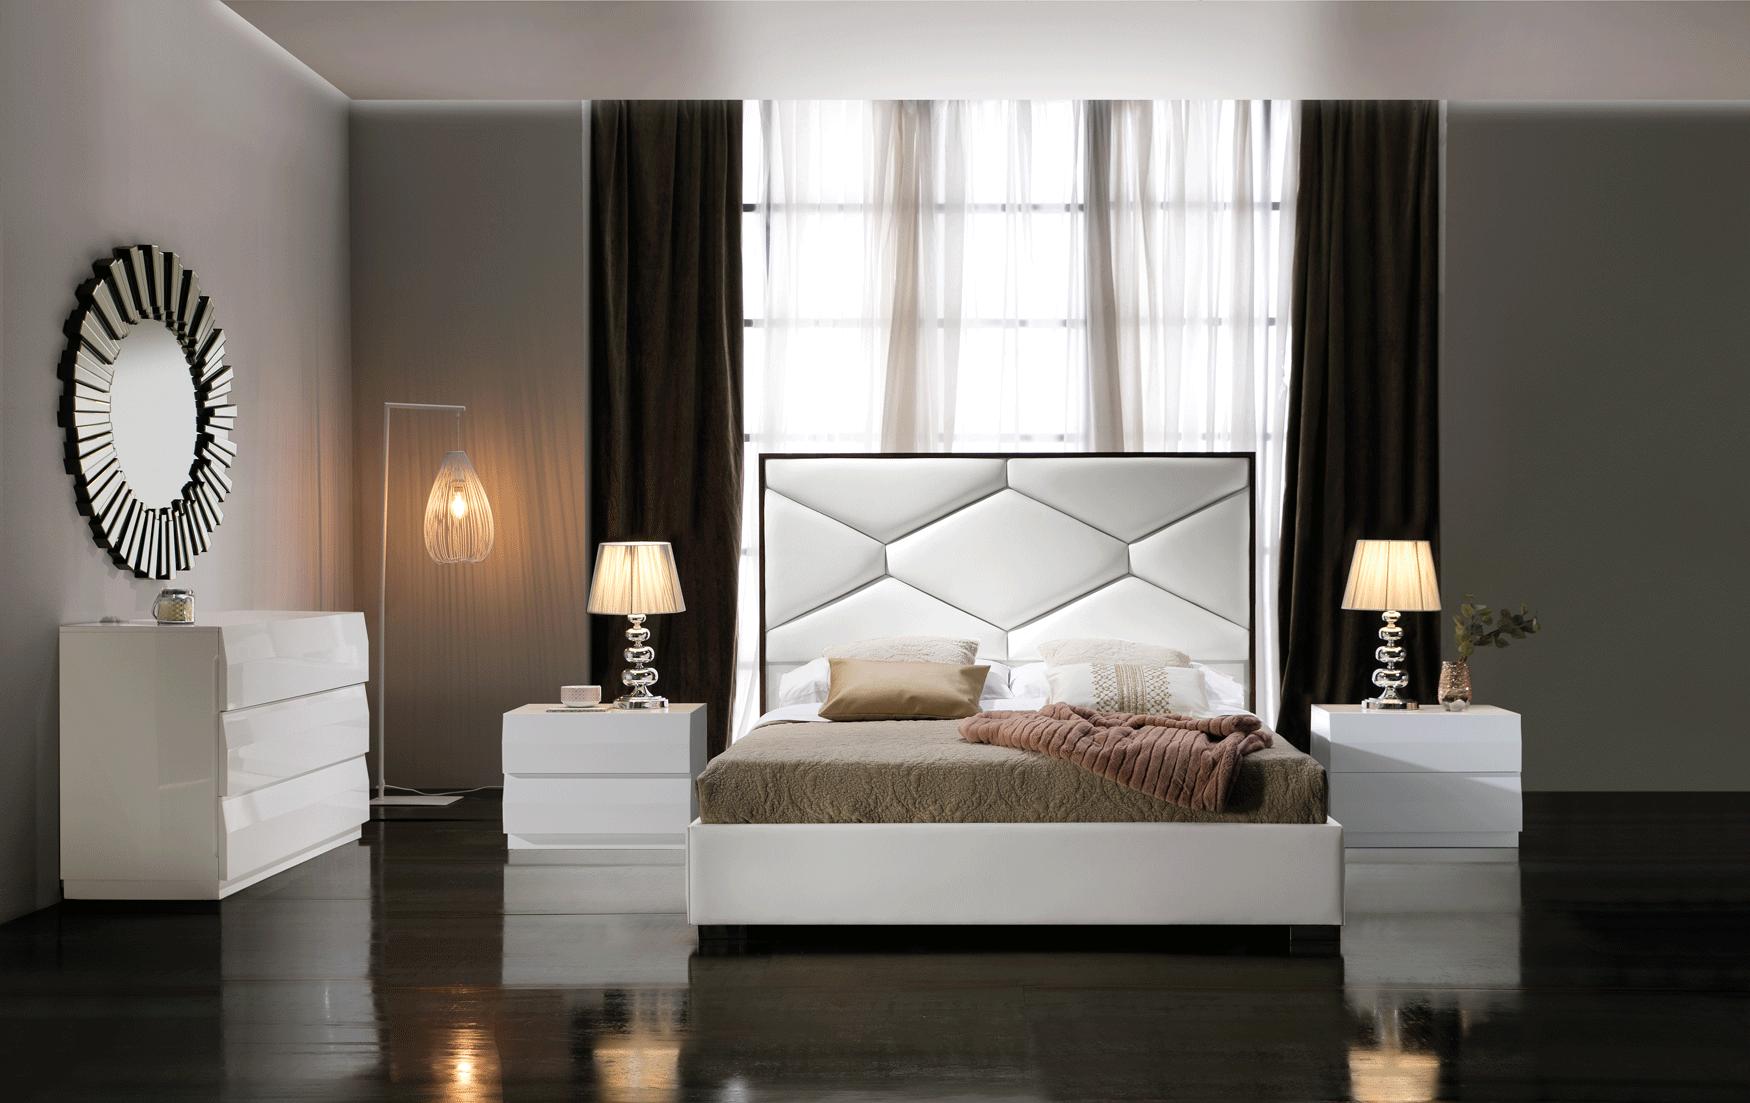 Contemporary, Modern Storage Bedroom Set MARTINABEDQSWHITE MARTINABEDQSWHITE-2NDM-5PC in White Eco-Leather